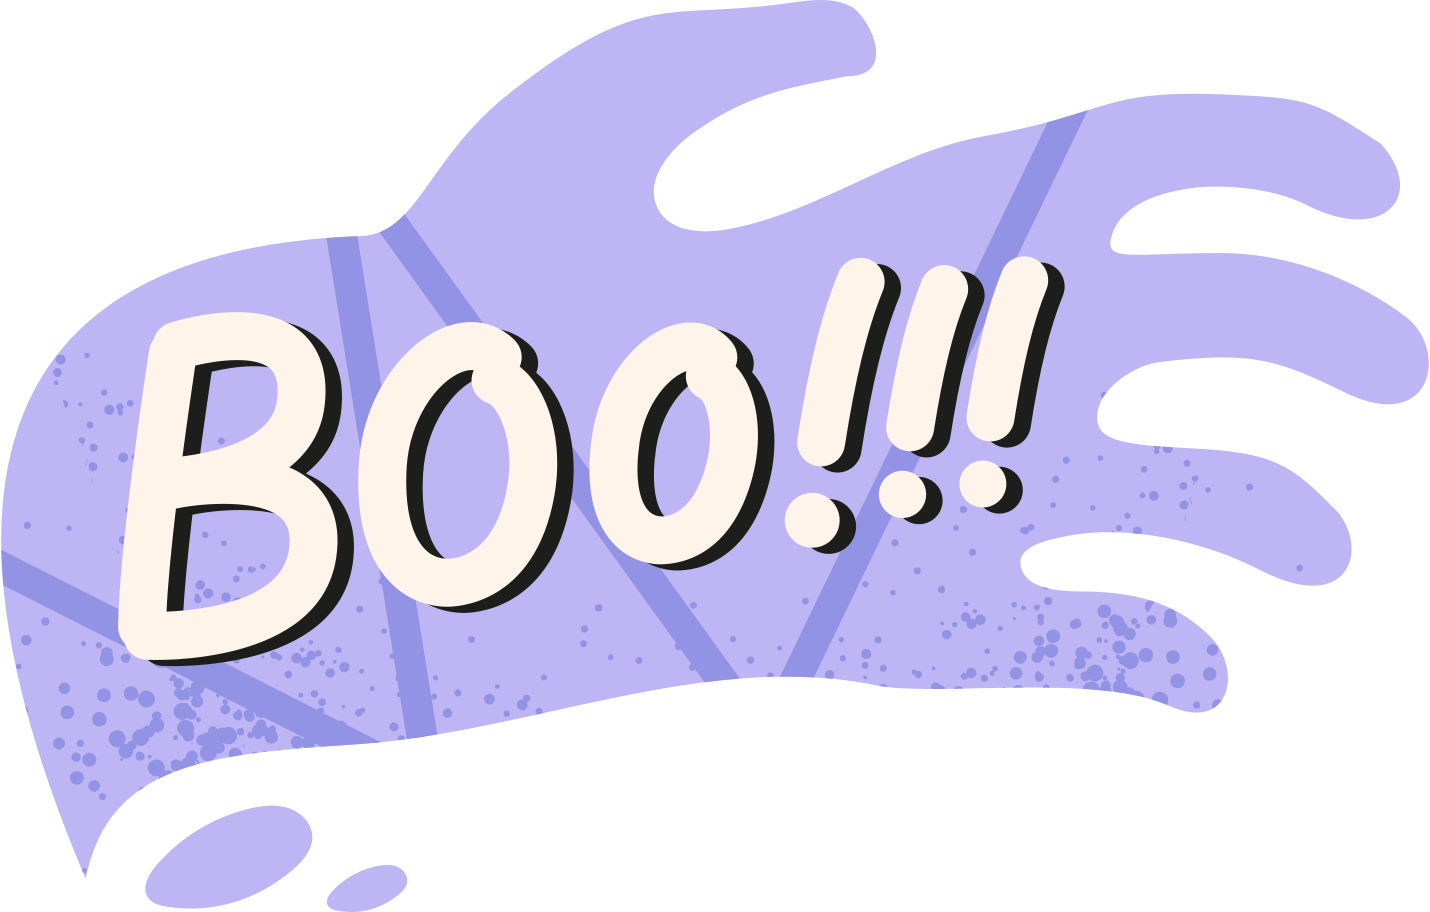 boo Illustration in PNG, SVG